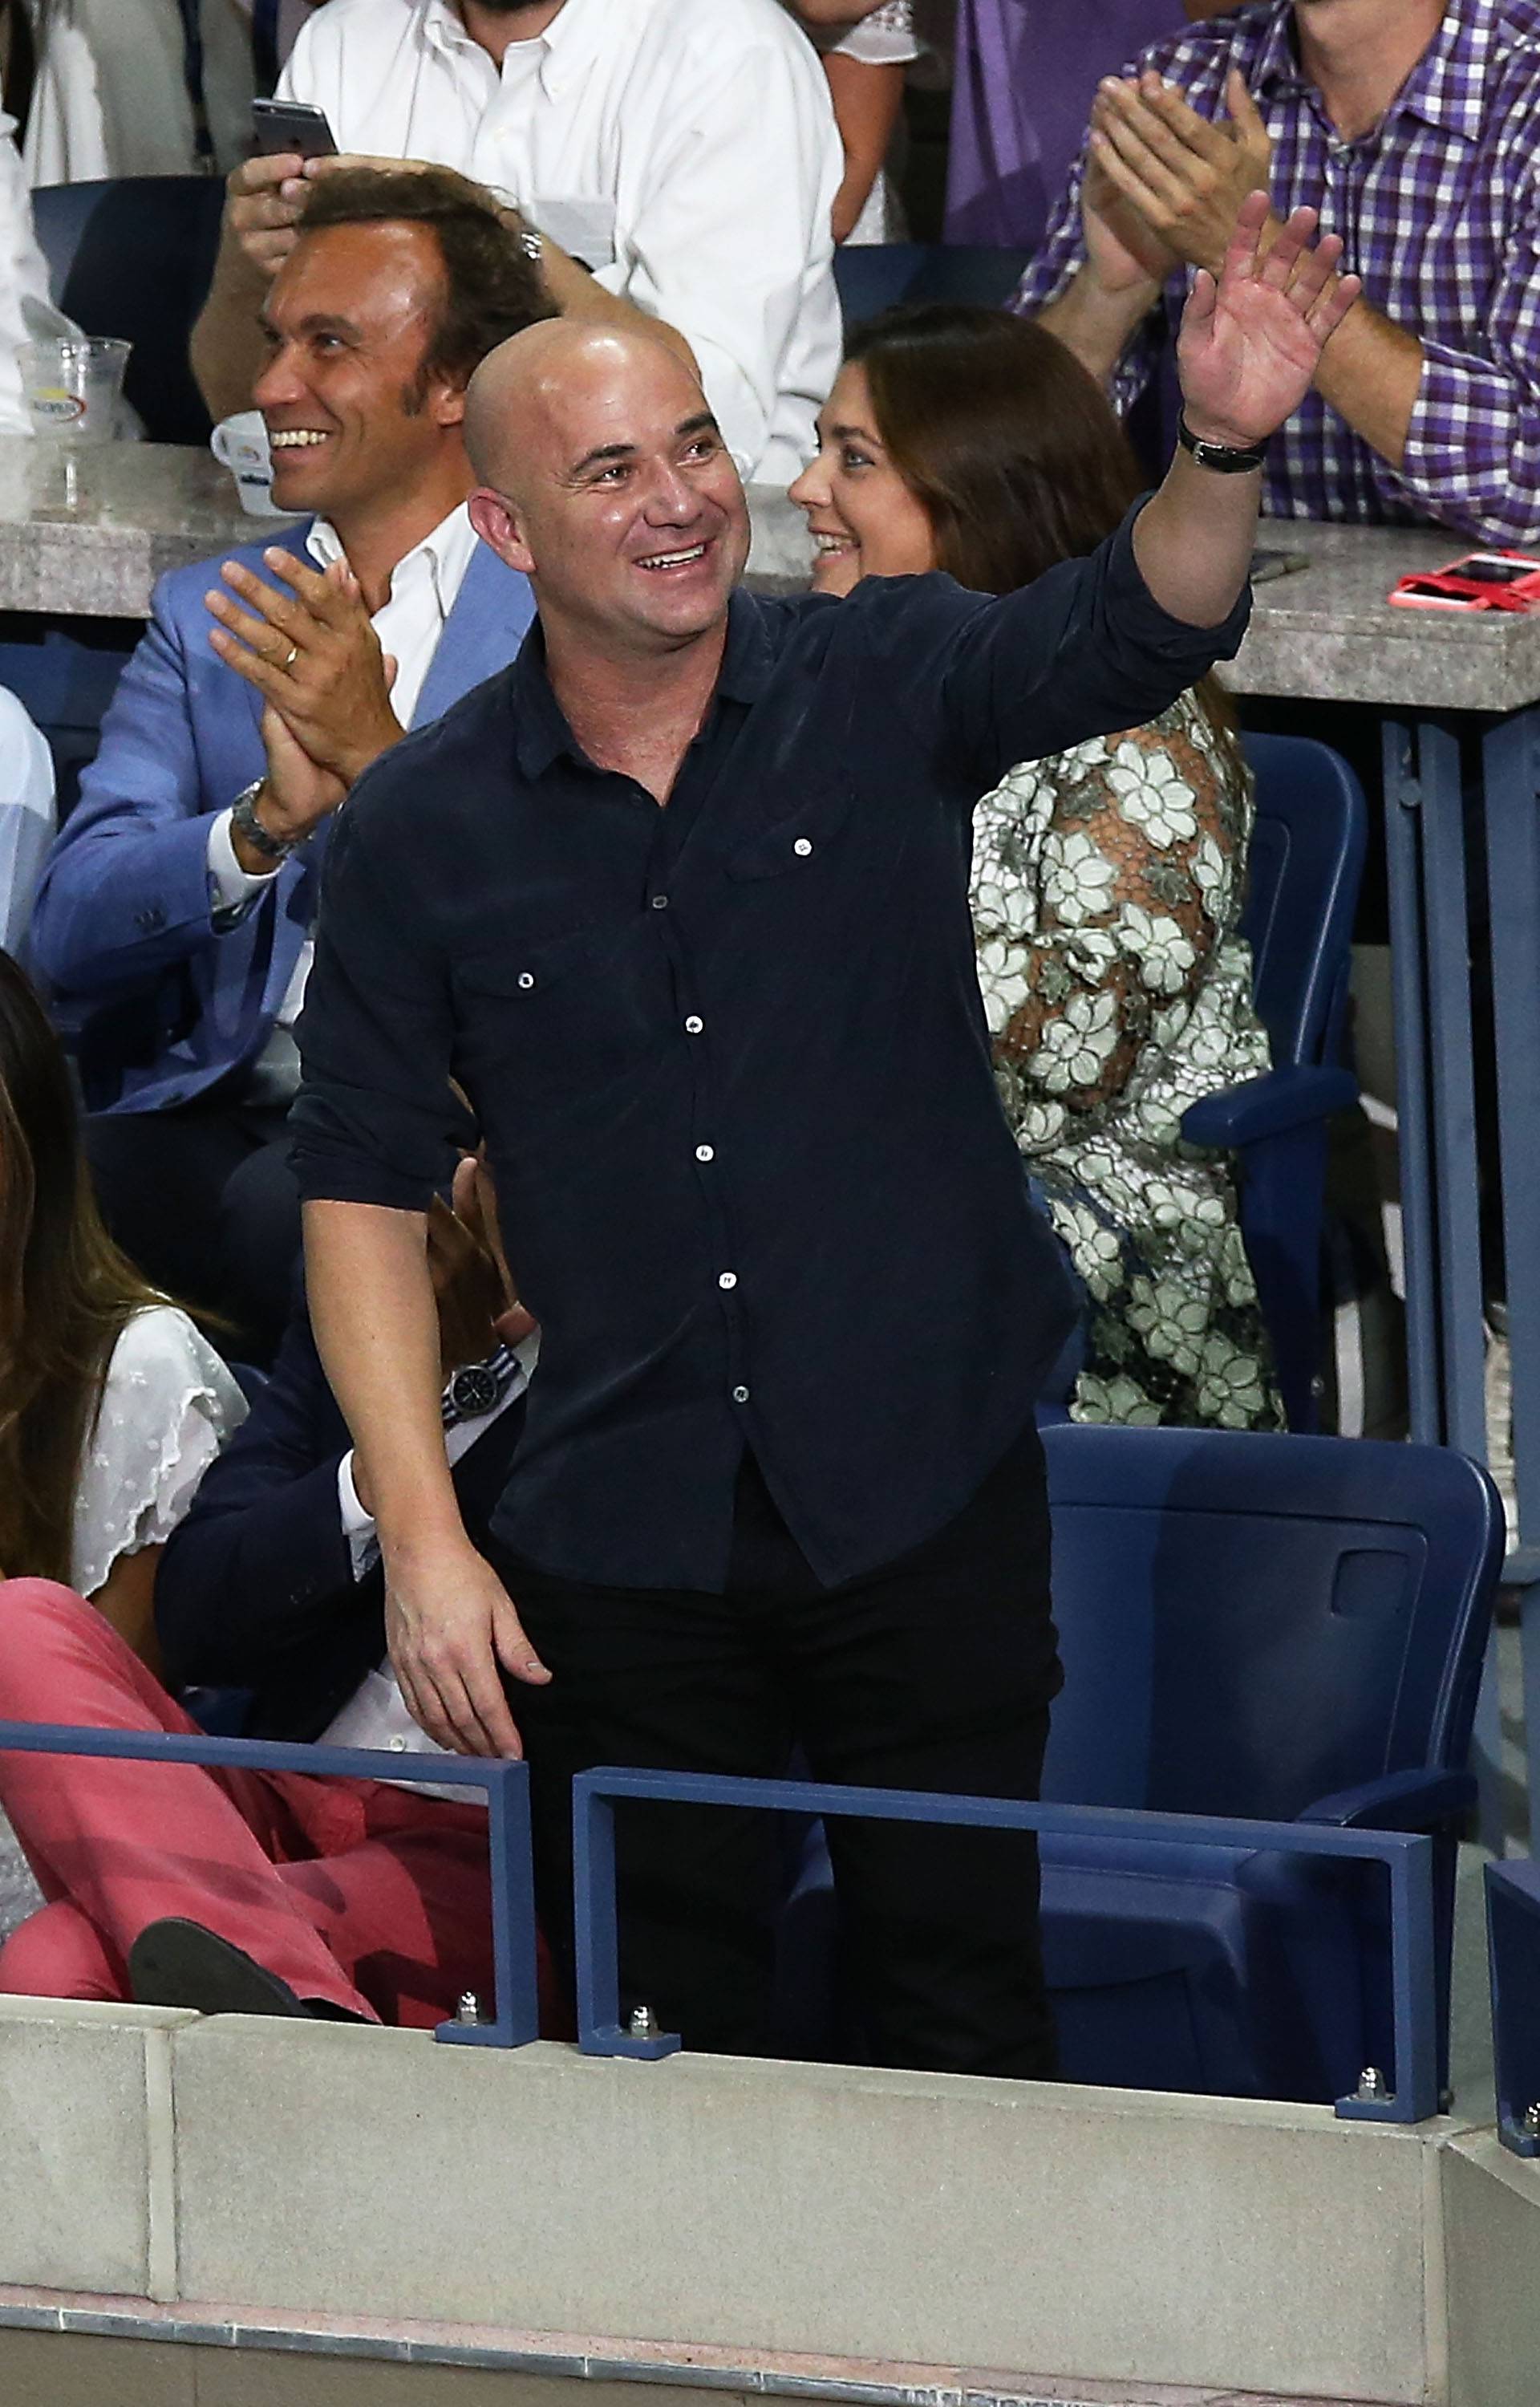 LAVAZZA - OFFICIAL COFFEE OF THE US OPEN - PARTNERS WITH INTERNATIONAL TENNIS LEGEND, ANDRE AGASSI